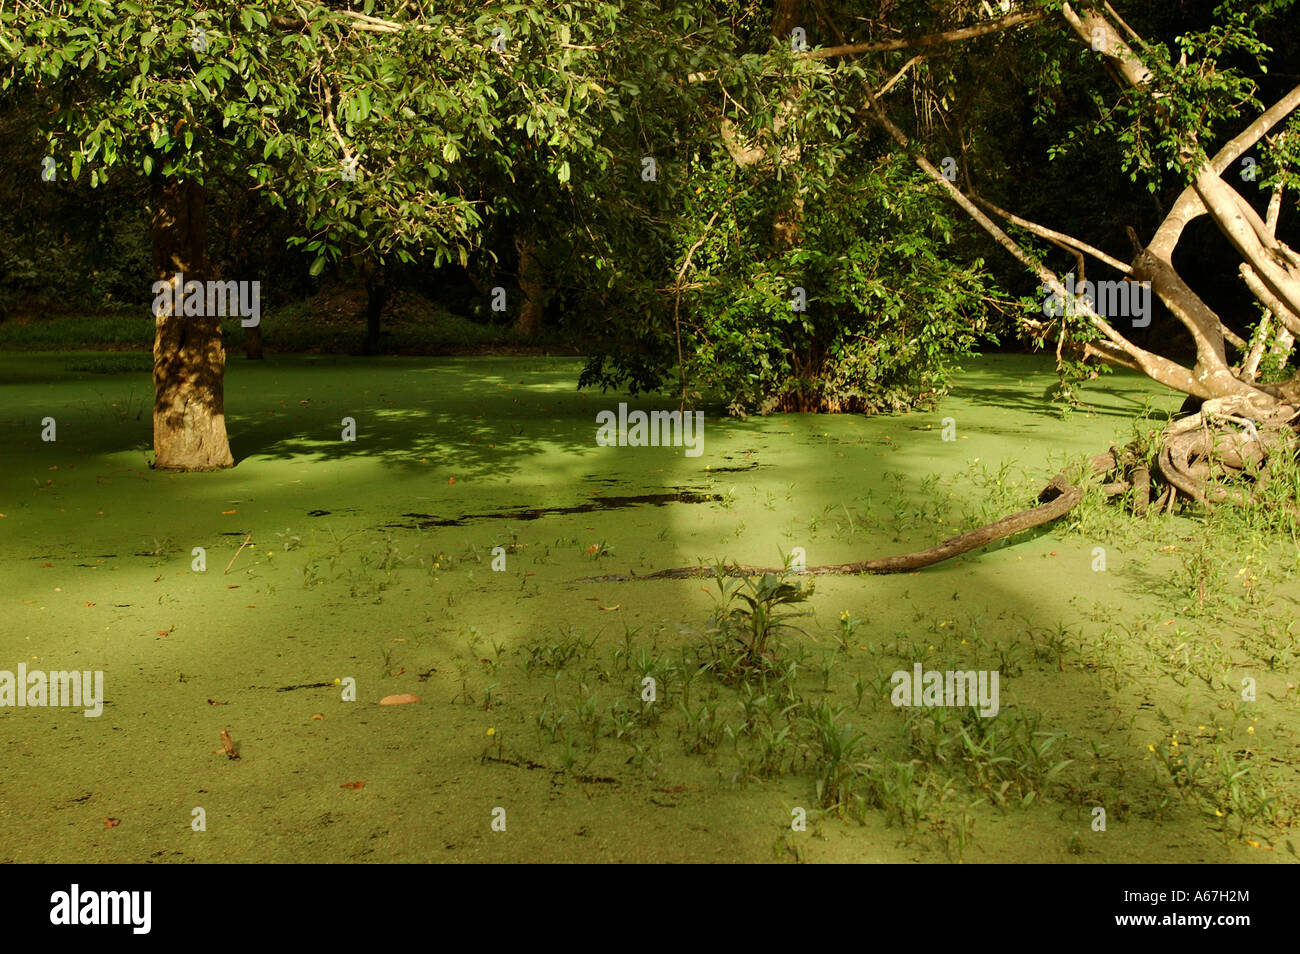 A green foliage covers the flooded gardens of Angkor Wat (or Angkor Vat) - Khmer temple,  Angkor, Cambodia. Stock Photo